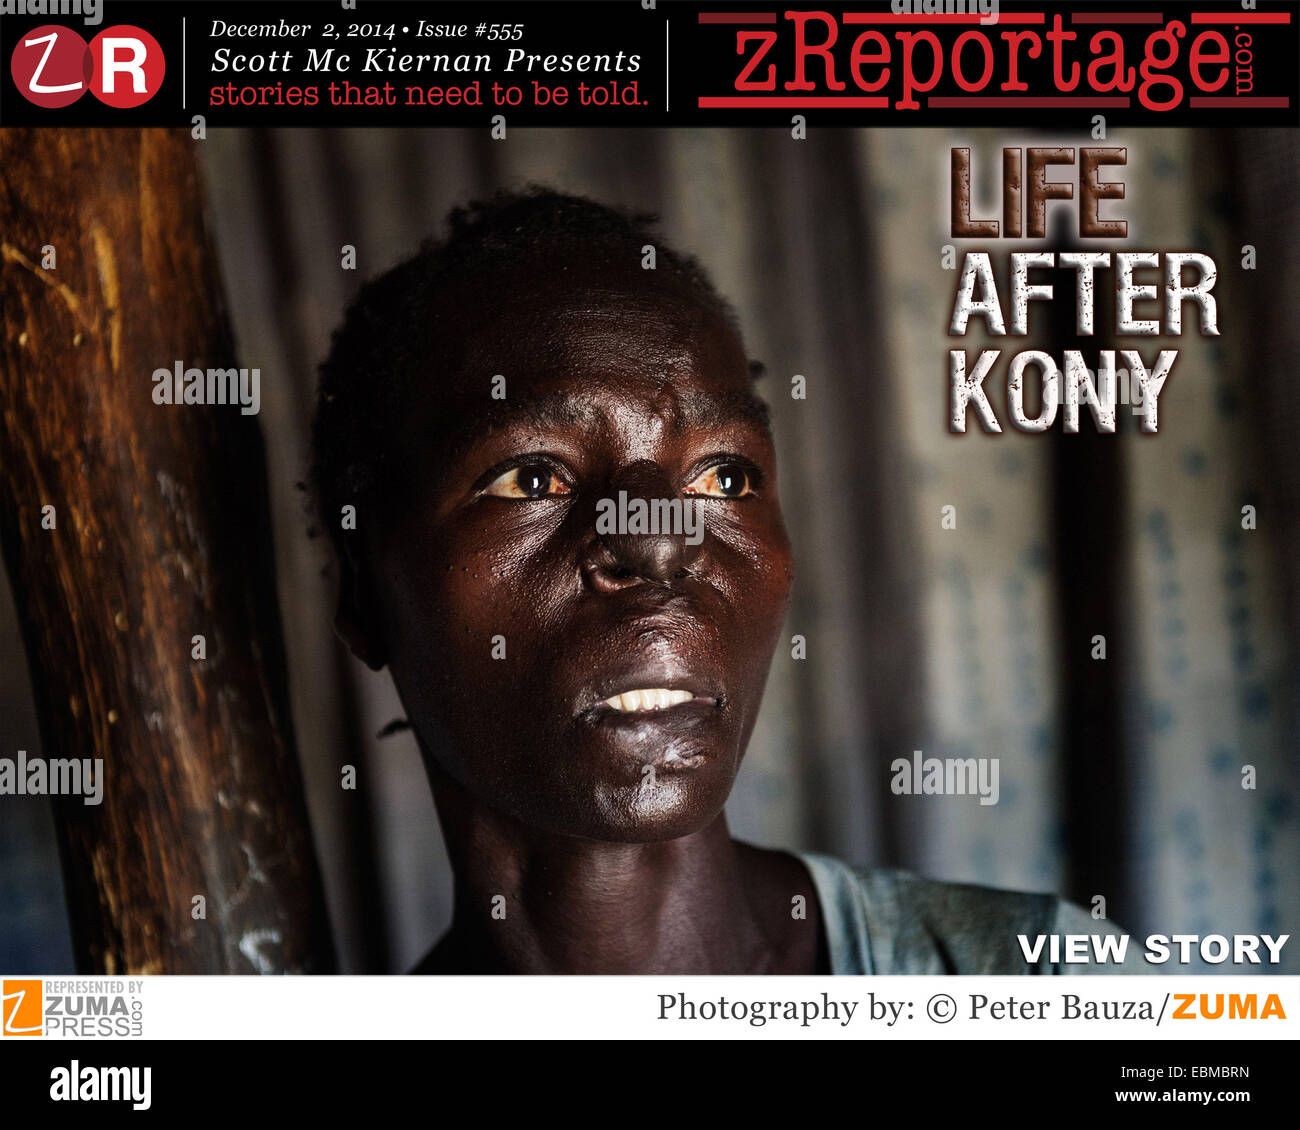 zReportage.com Story of the Week # 555 - Life After Kony - Launched December 2, 2014 - Full multimedia experience: audio, stills, text and or video: Go to zReportage.com to see more - Abducted by Joseph Kony's renegade group, the photographs show victims who were hacked with machetes and knives during the Lord's Resistance Army's (LRA) reign of terror in northern Uganda. A former Catholic altar boy from northern Uganda, Joseph Kony claims that his LRA movement has been fighting to install a government in Uganda based on the Biblical 10 Commandments. But his rebels now terrorize large swathes o Stock Photo